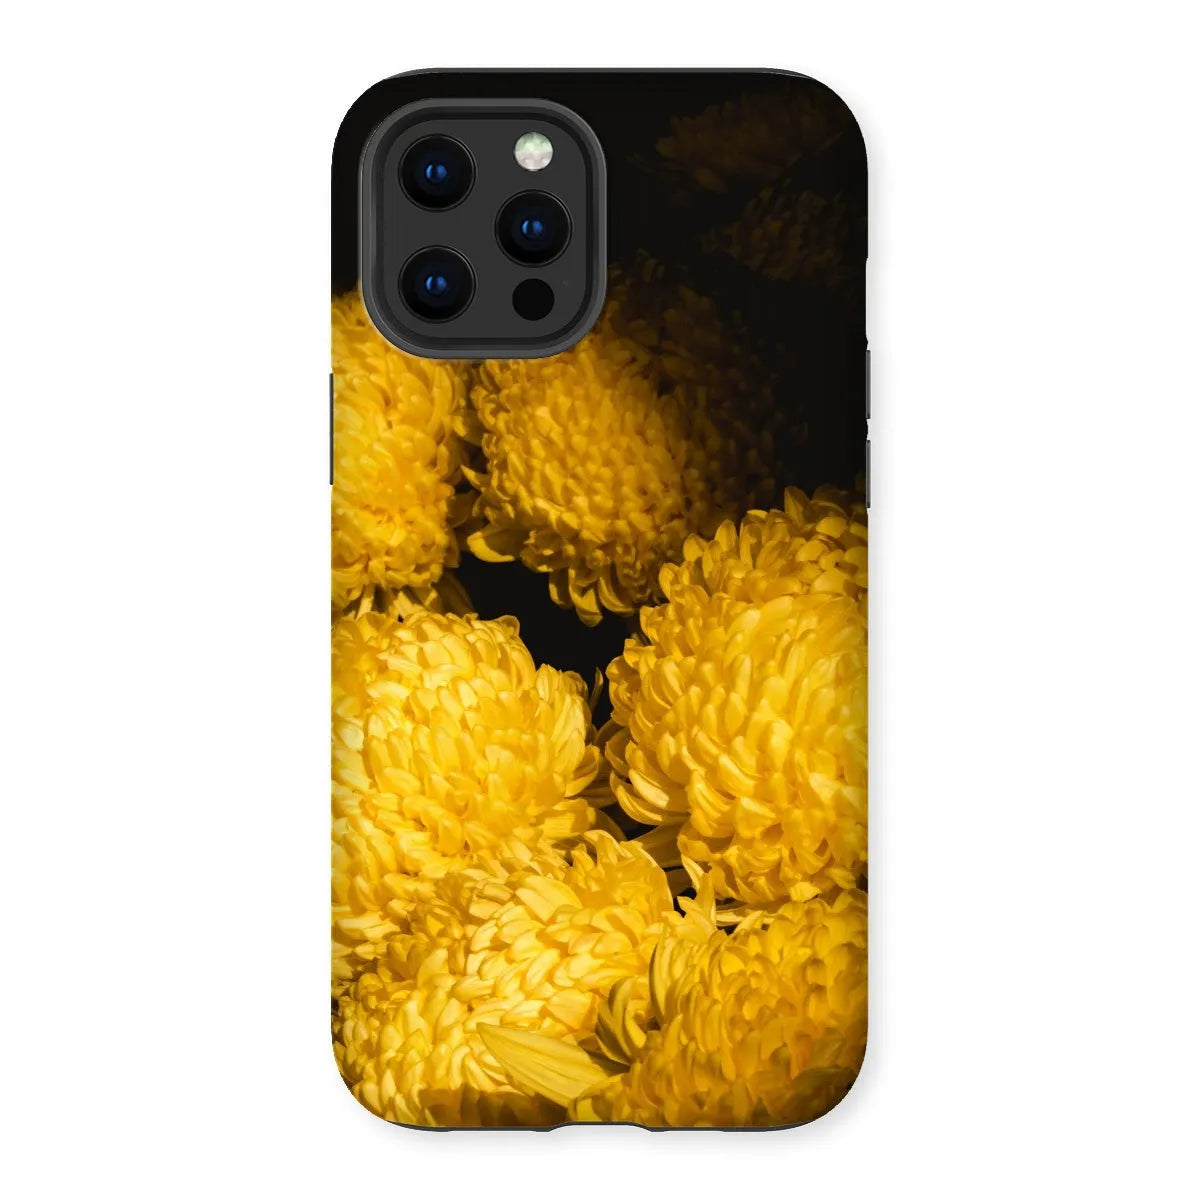 Field Of Dreams Tough Phone Case - Iphone 12 Pro Max / Matte - Mobile Phone Cases - Aesthetic Art